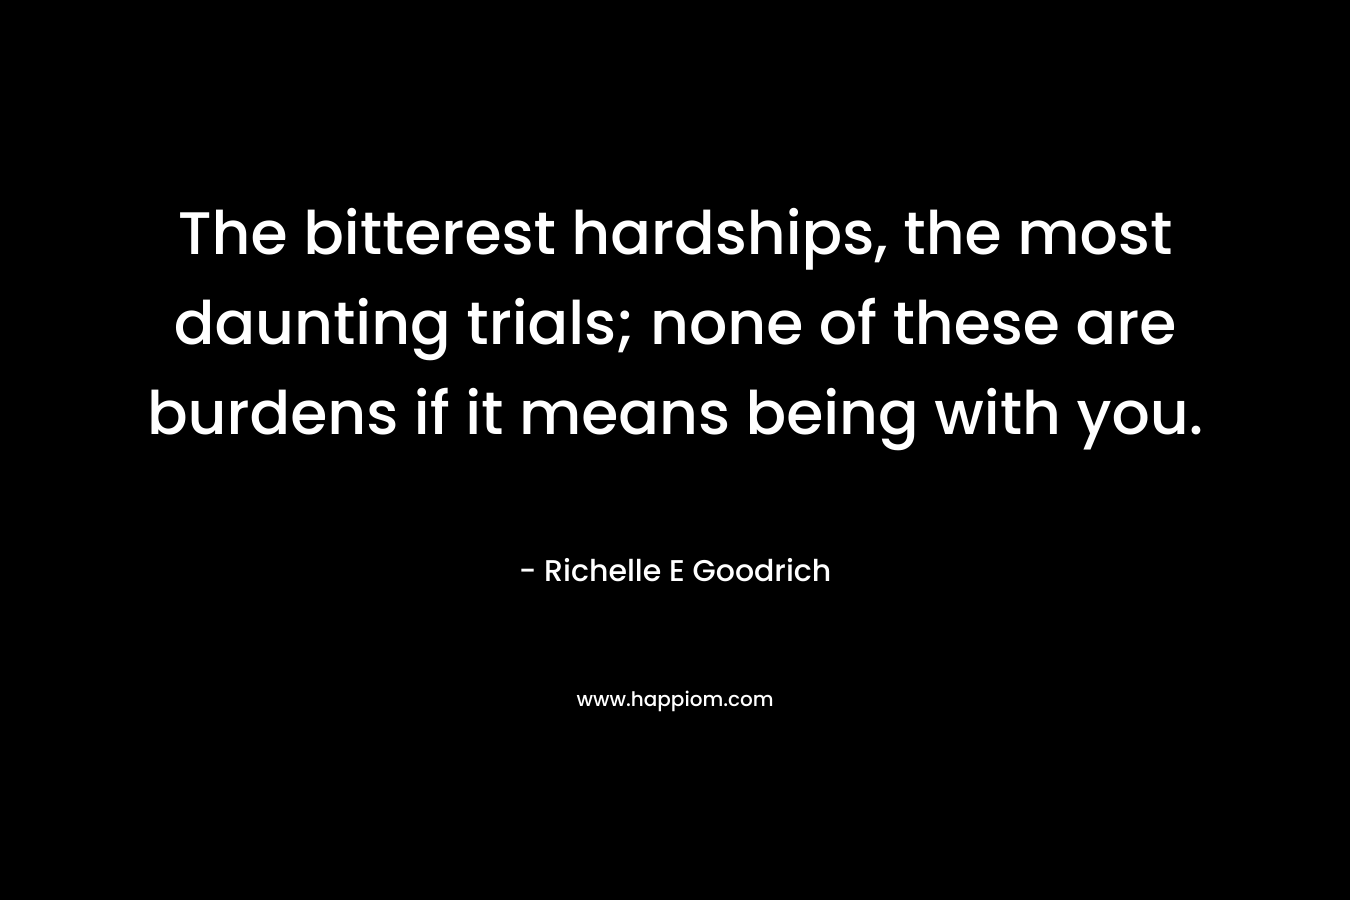 The bitterest hardships, the most daunting trials; none of these are burdens if it means being with you.